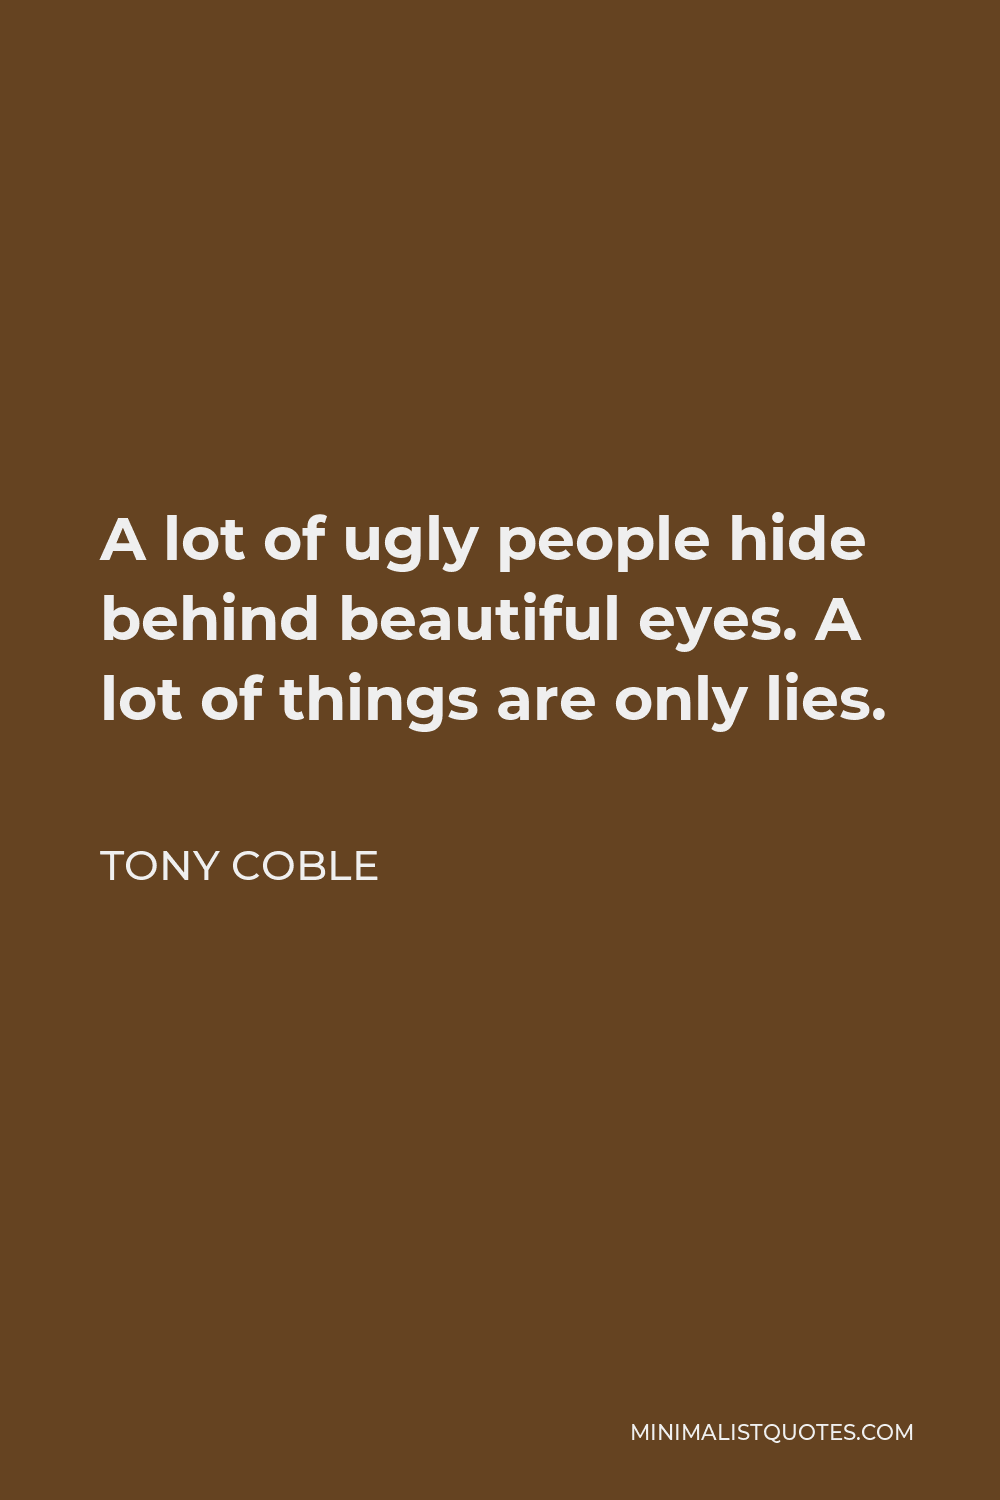 Tony Coble Quote - A lot of ugly people hide behind beautiful eyes. A lot of things are only lies.